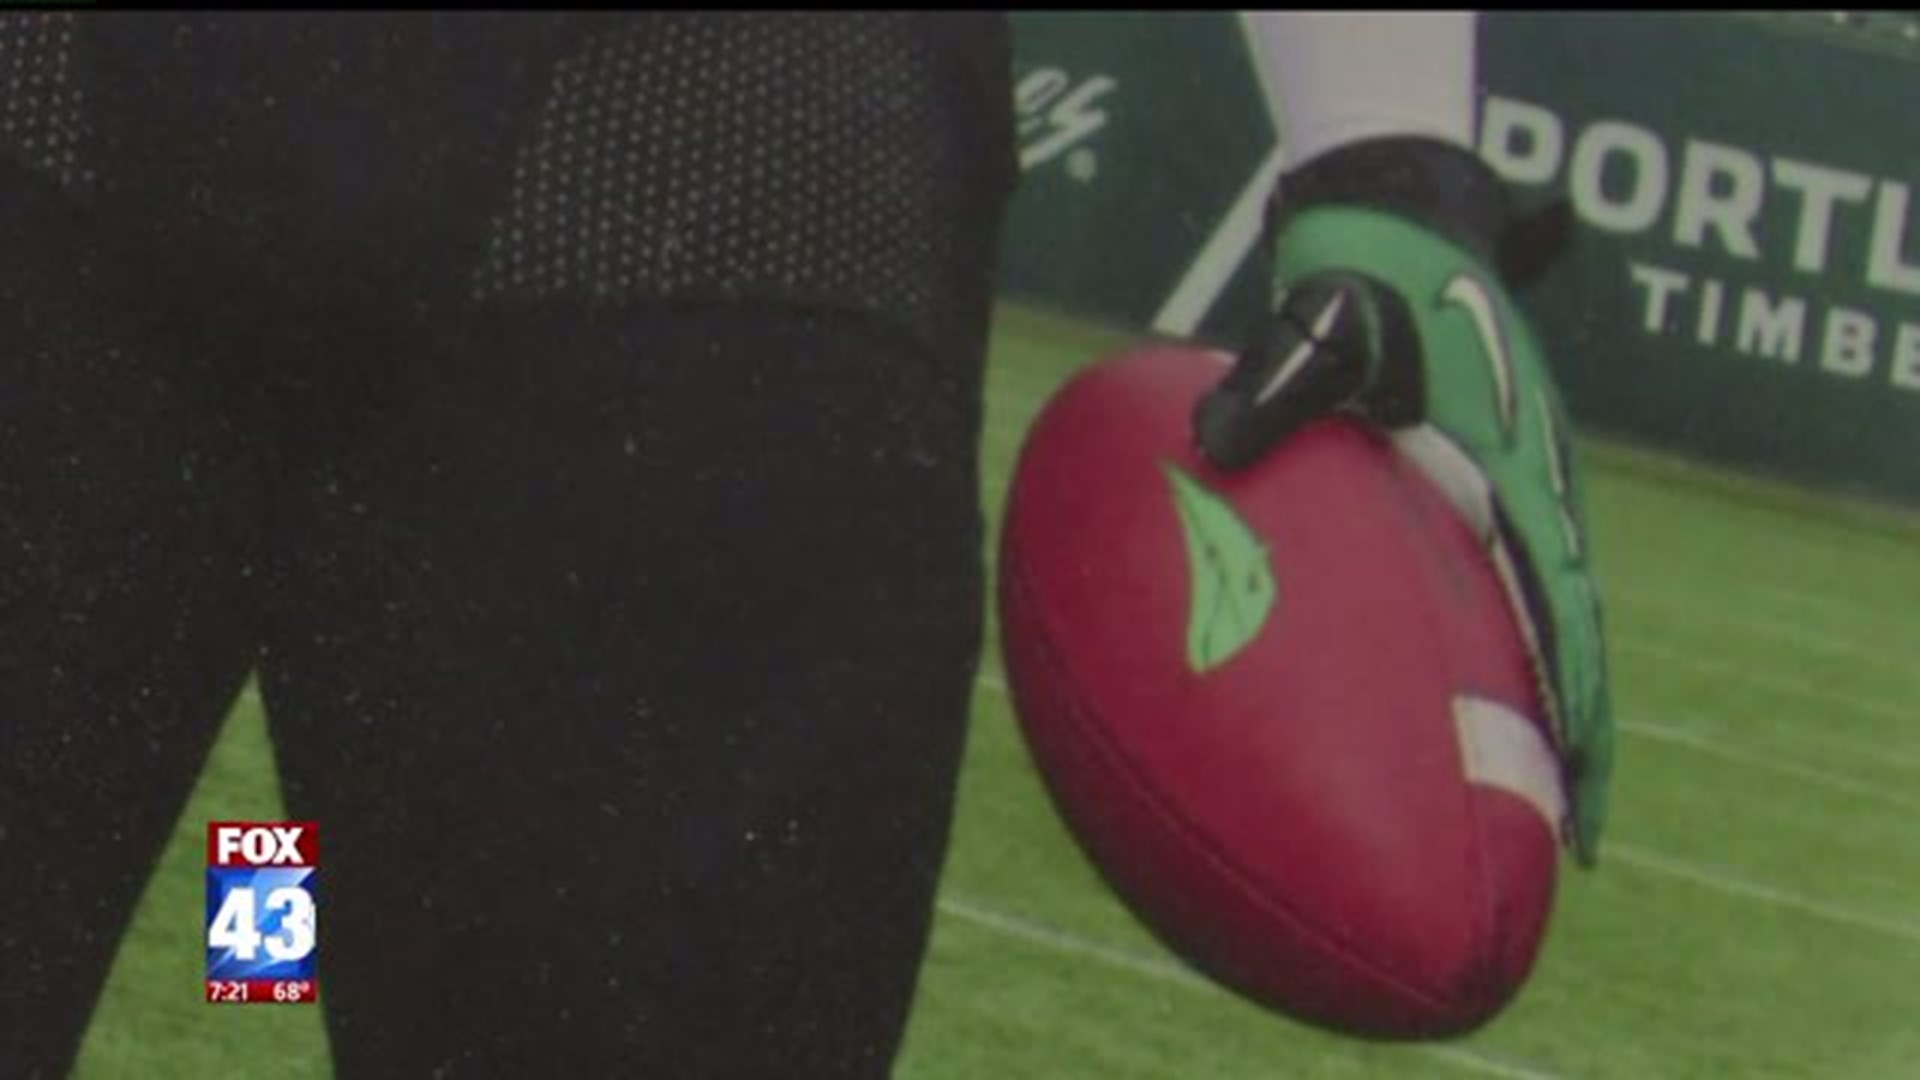 Local reaction: Football player says he is told to choose between church or football